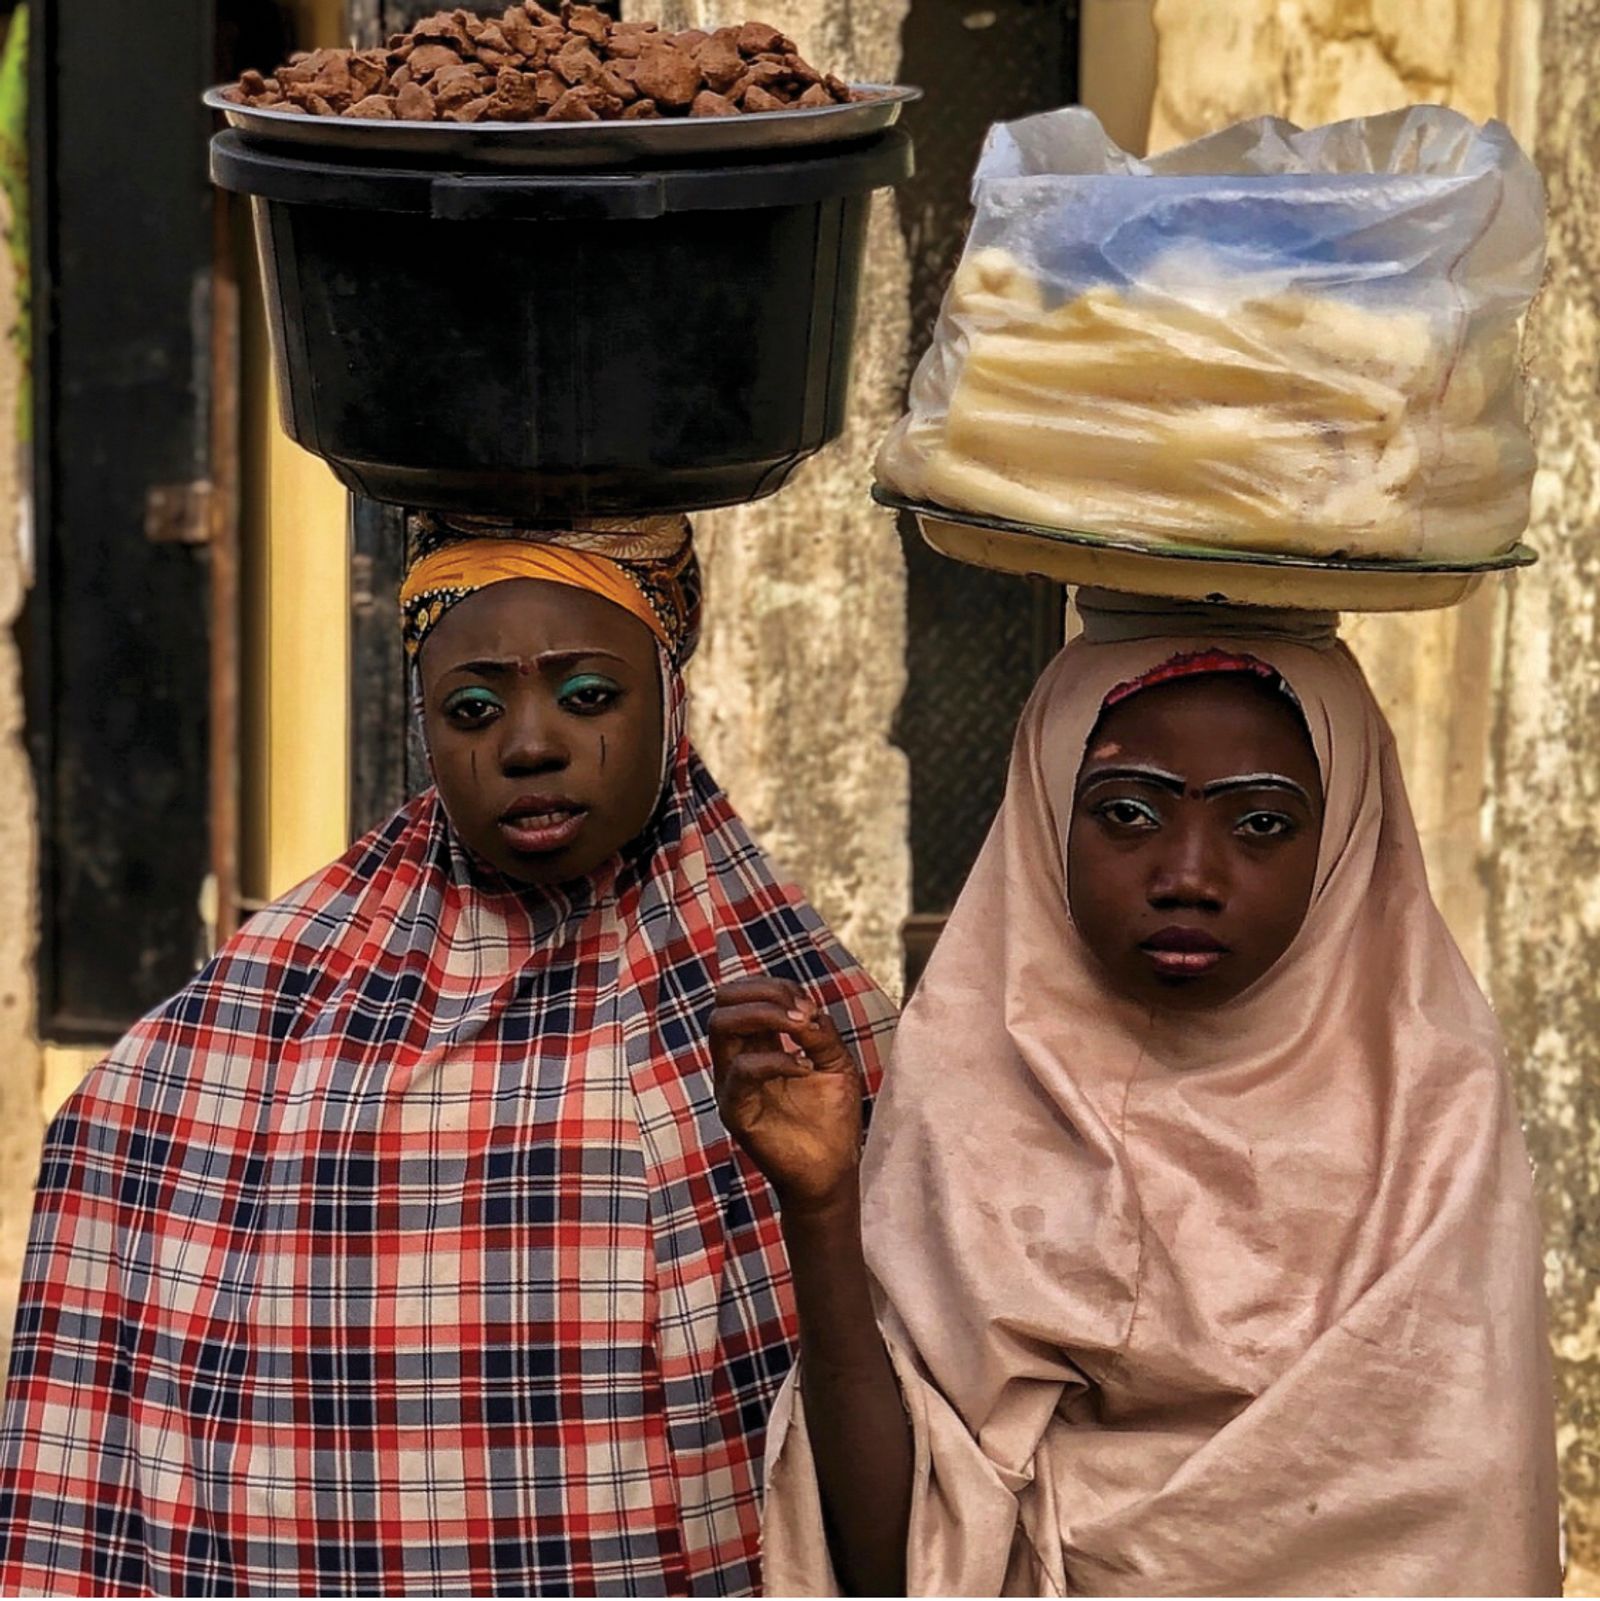 © Nwando Ebeledike - This photo was taken in Kano, Nigeria and is a photo of two friends hawking complimentary products